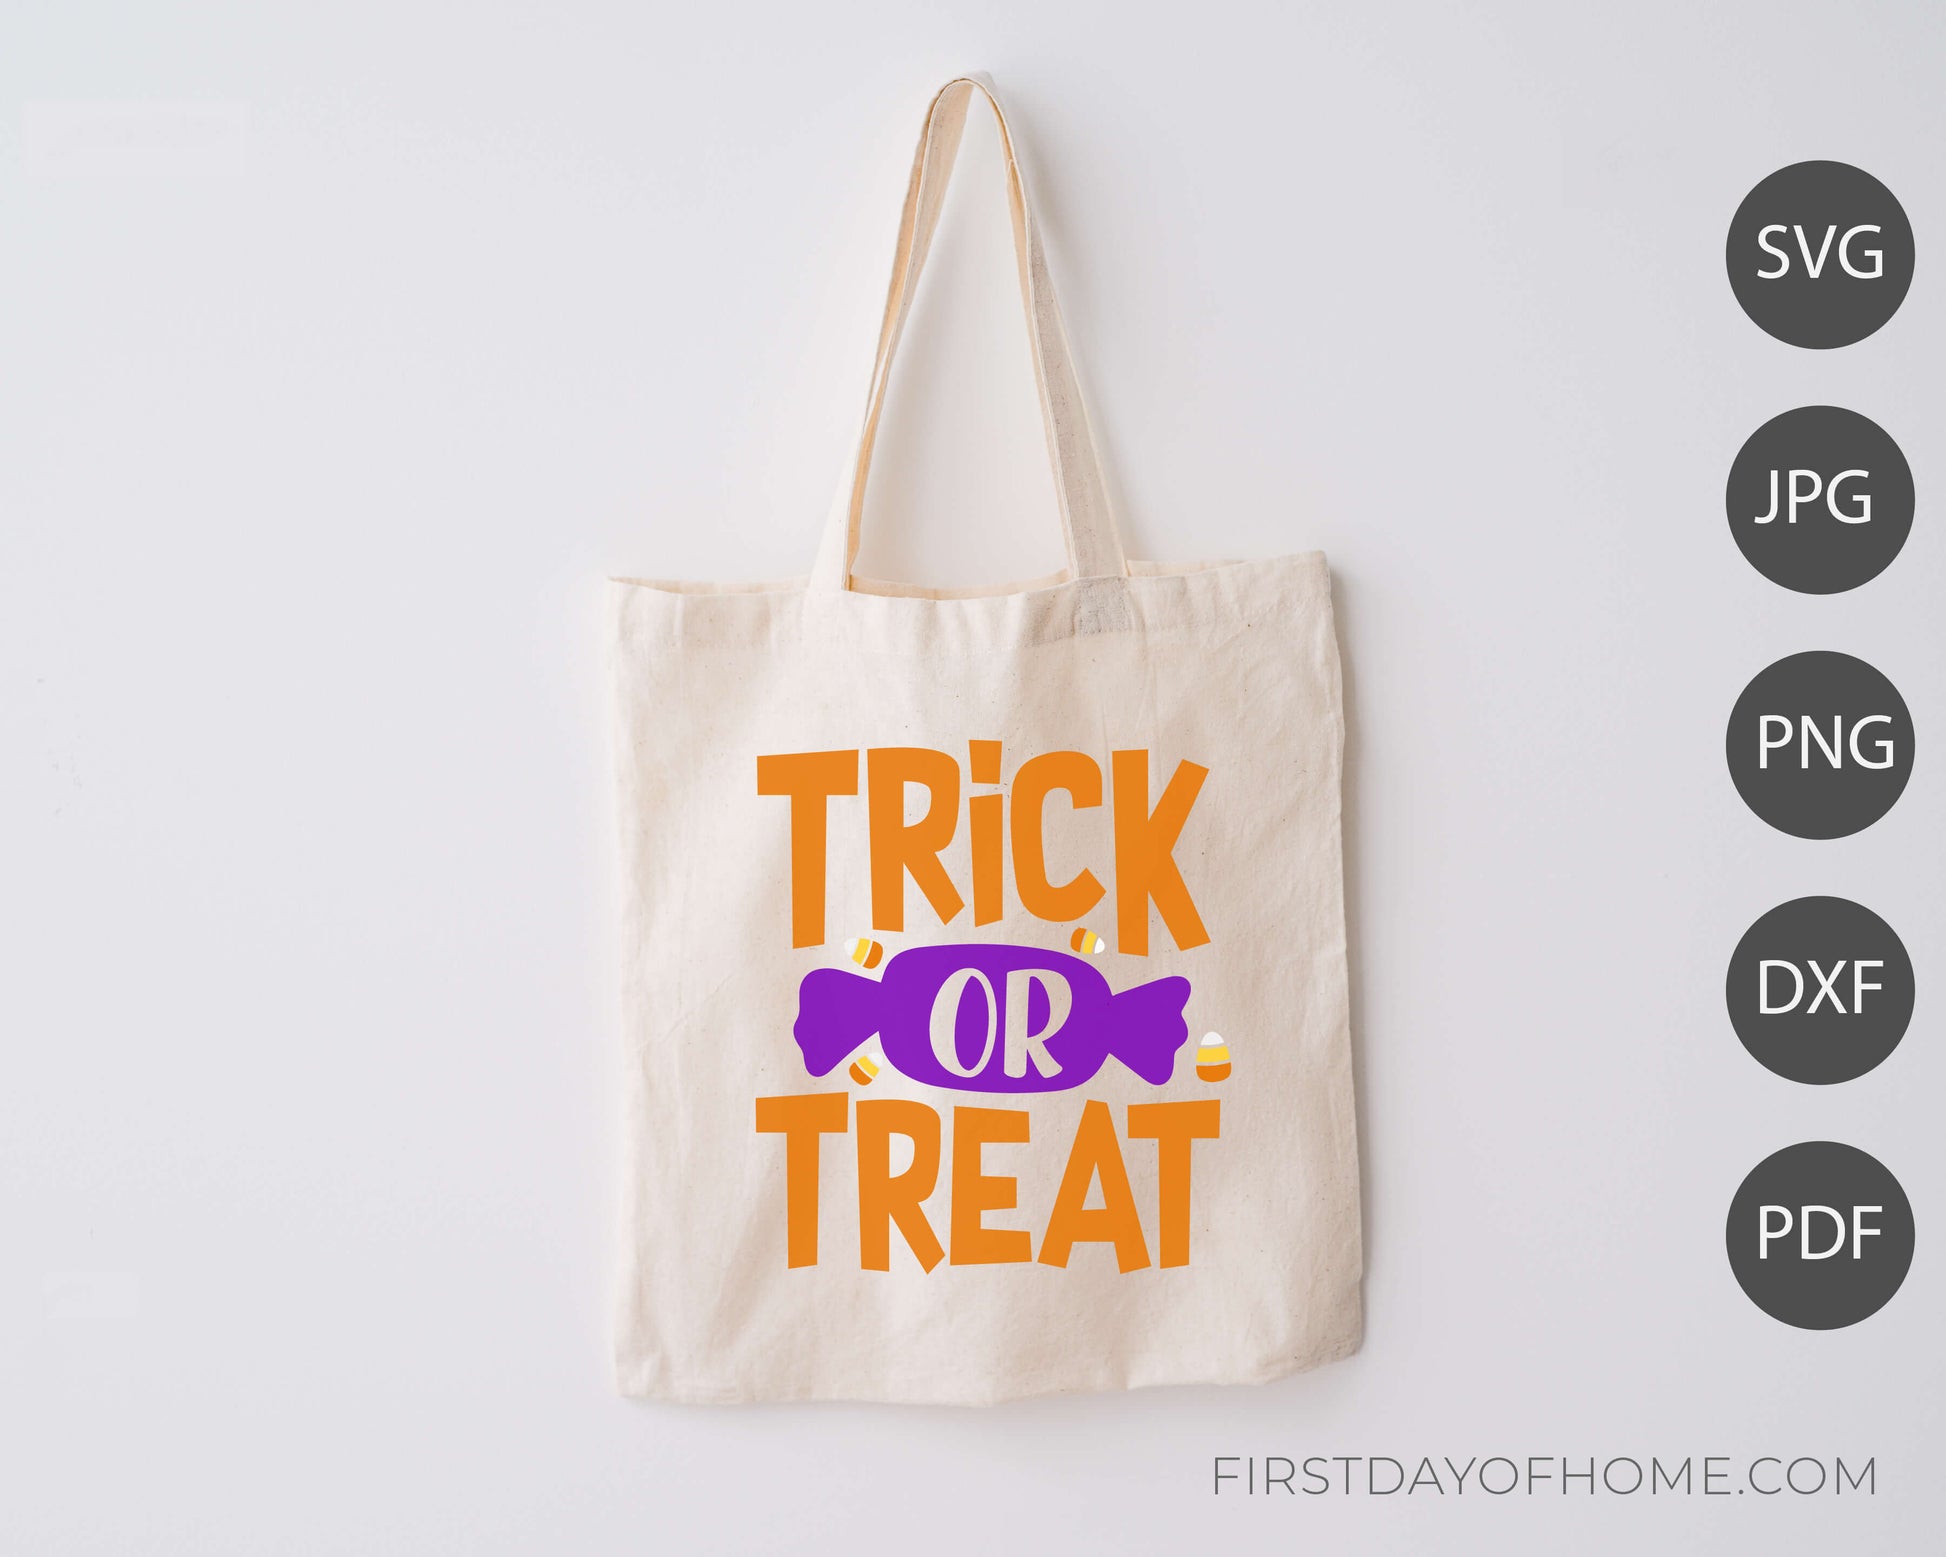 Mockup example of Trick or Treat bag using digital files. Lists digital files as SVG, JPG, PNG, DXF and PDF